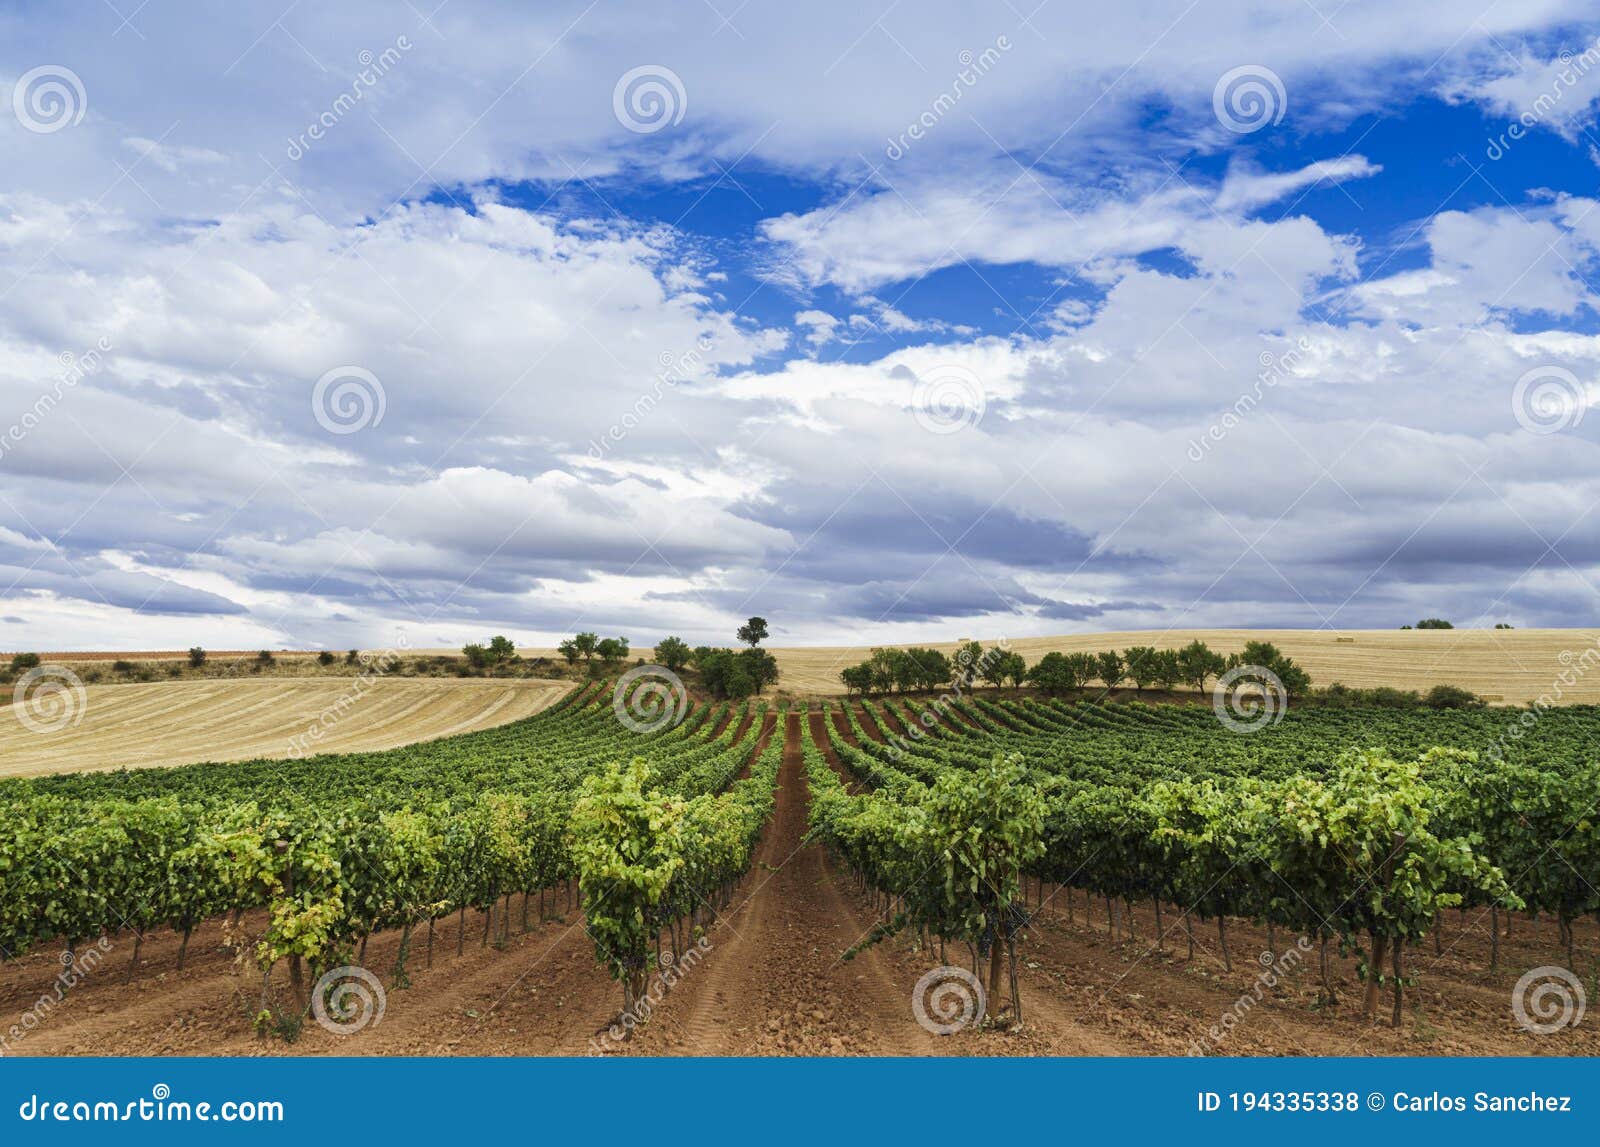 vineyard field with blue sky and white clouds in the region of ribera del duero.